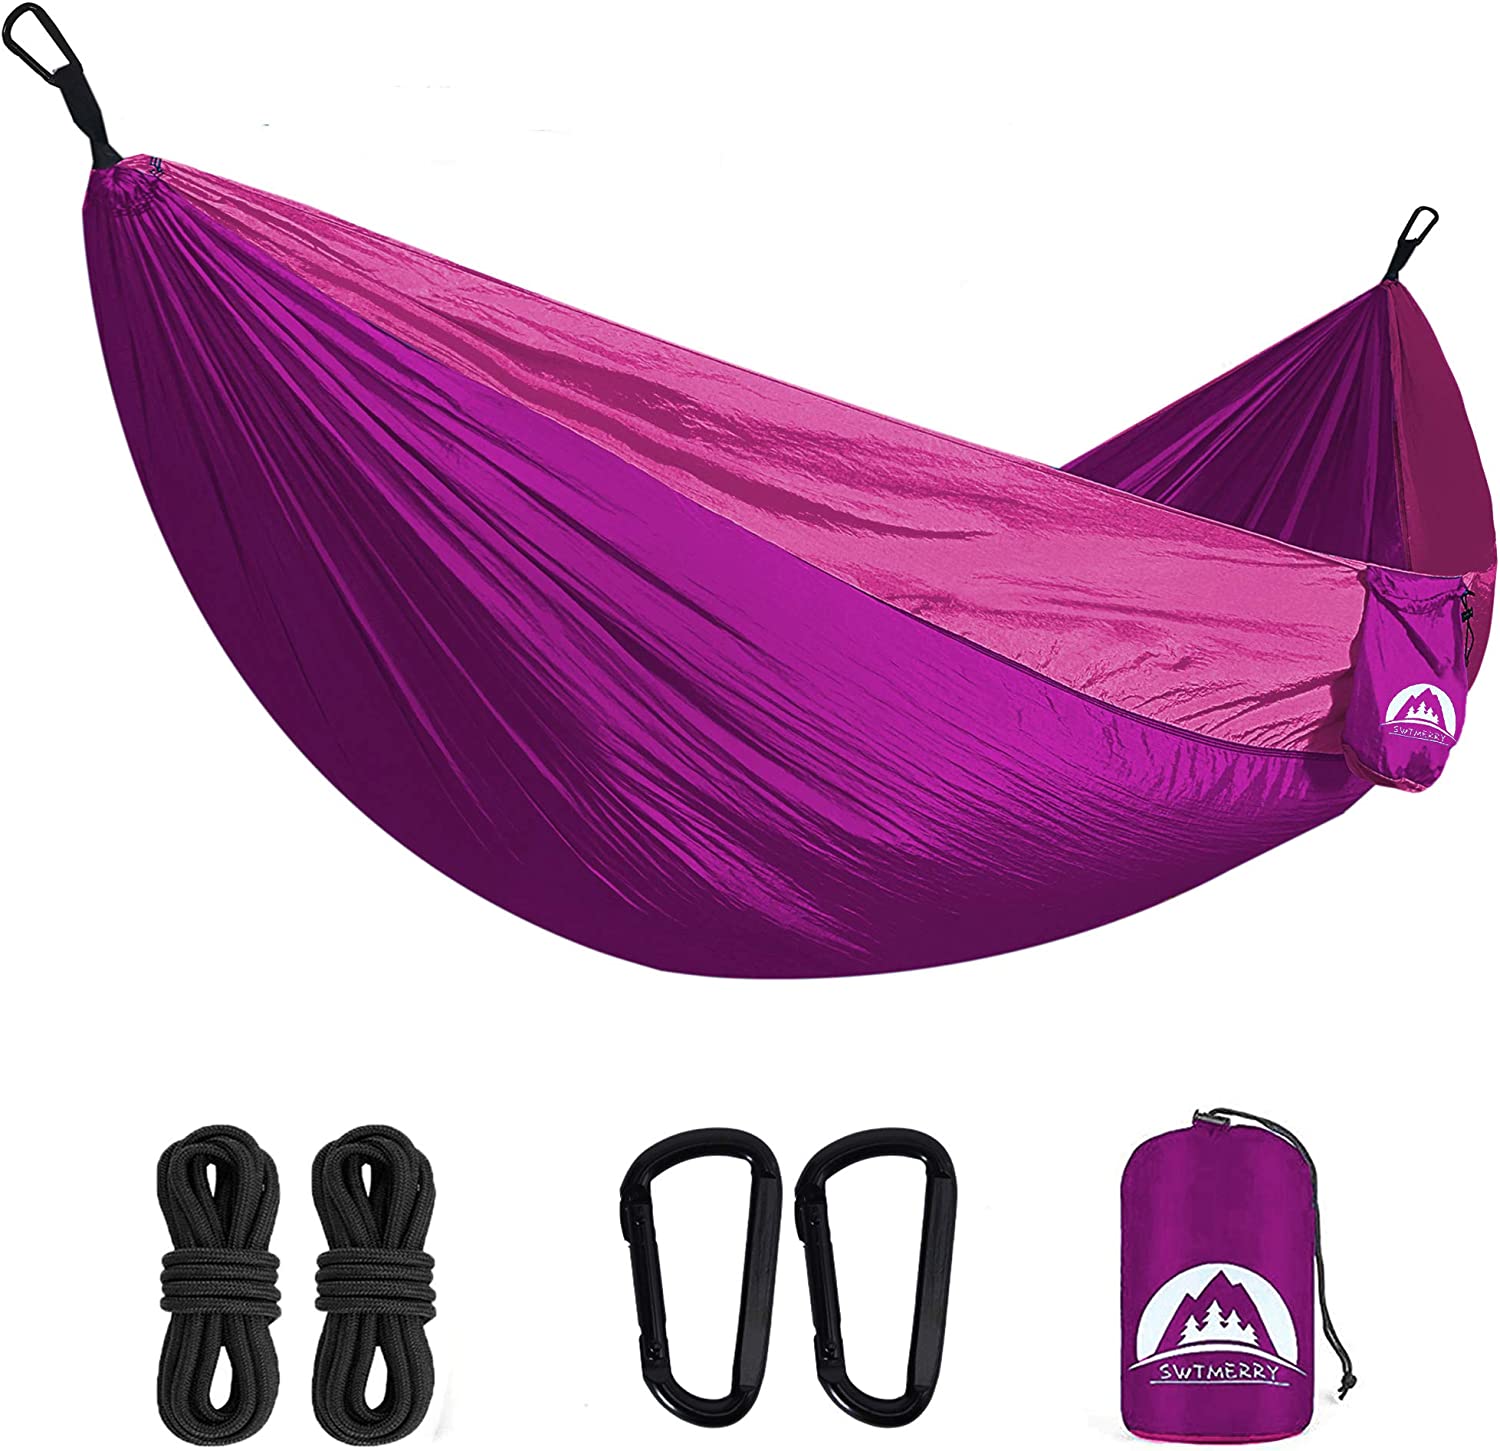  4. SWTMERRY Double Camping Hammock 